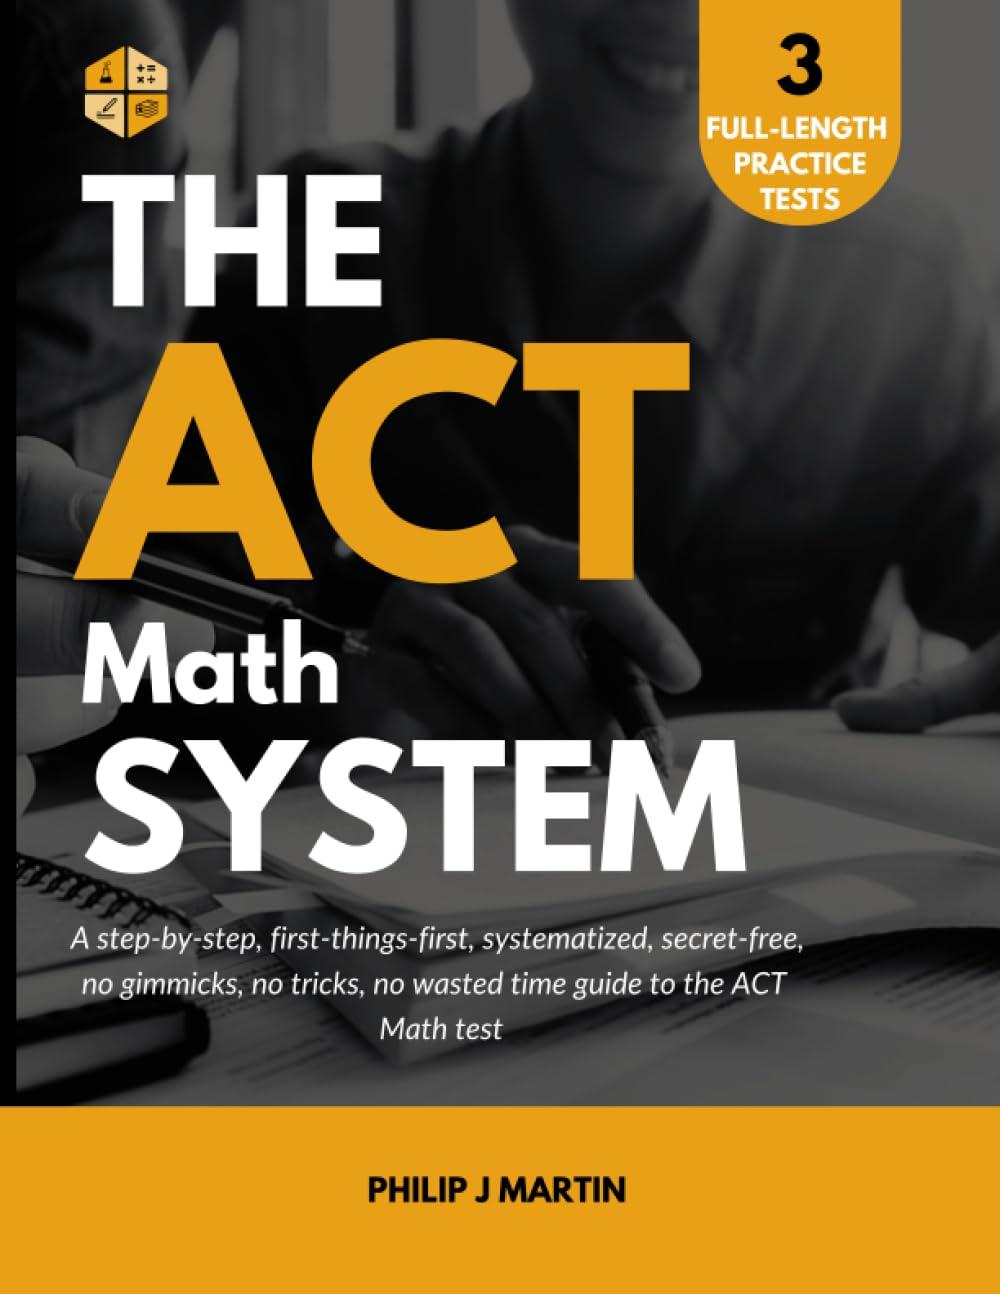 The ACT Math System A Systematized Step By Step First Things First No Gimmicks Or Tricks Secret Free No Wasted Time Guide To The ACT Math Test